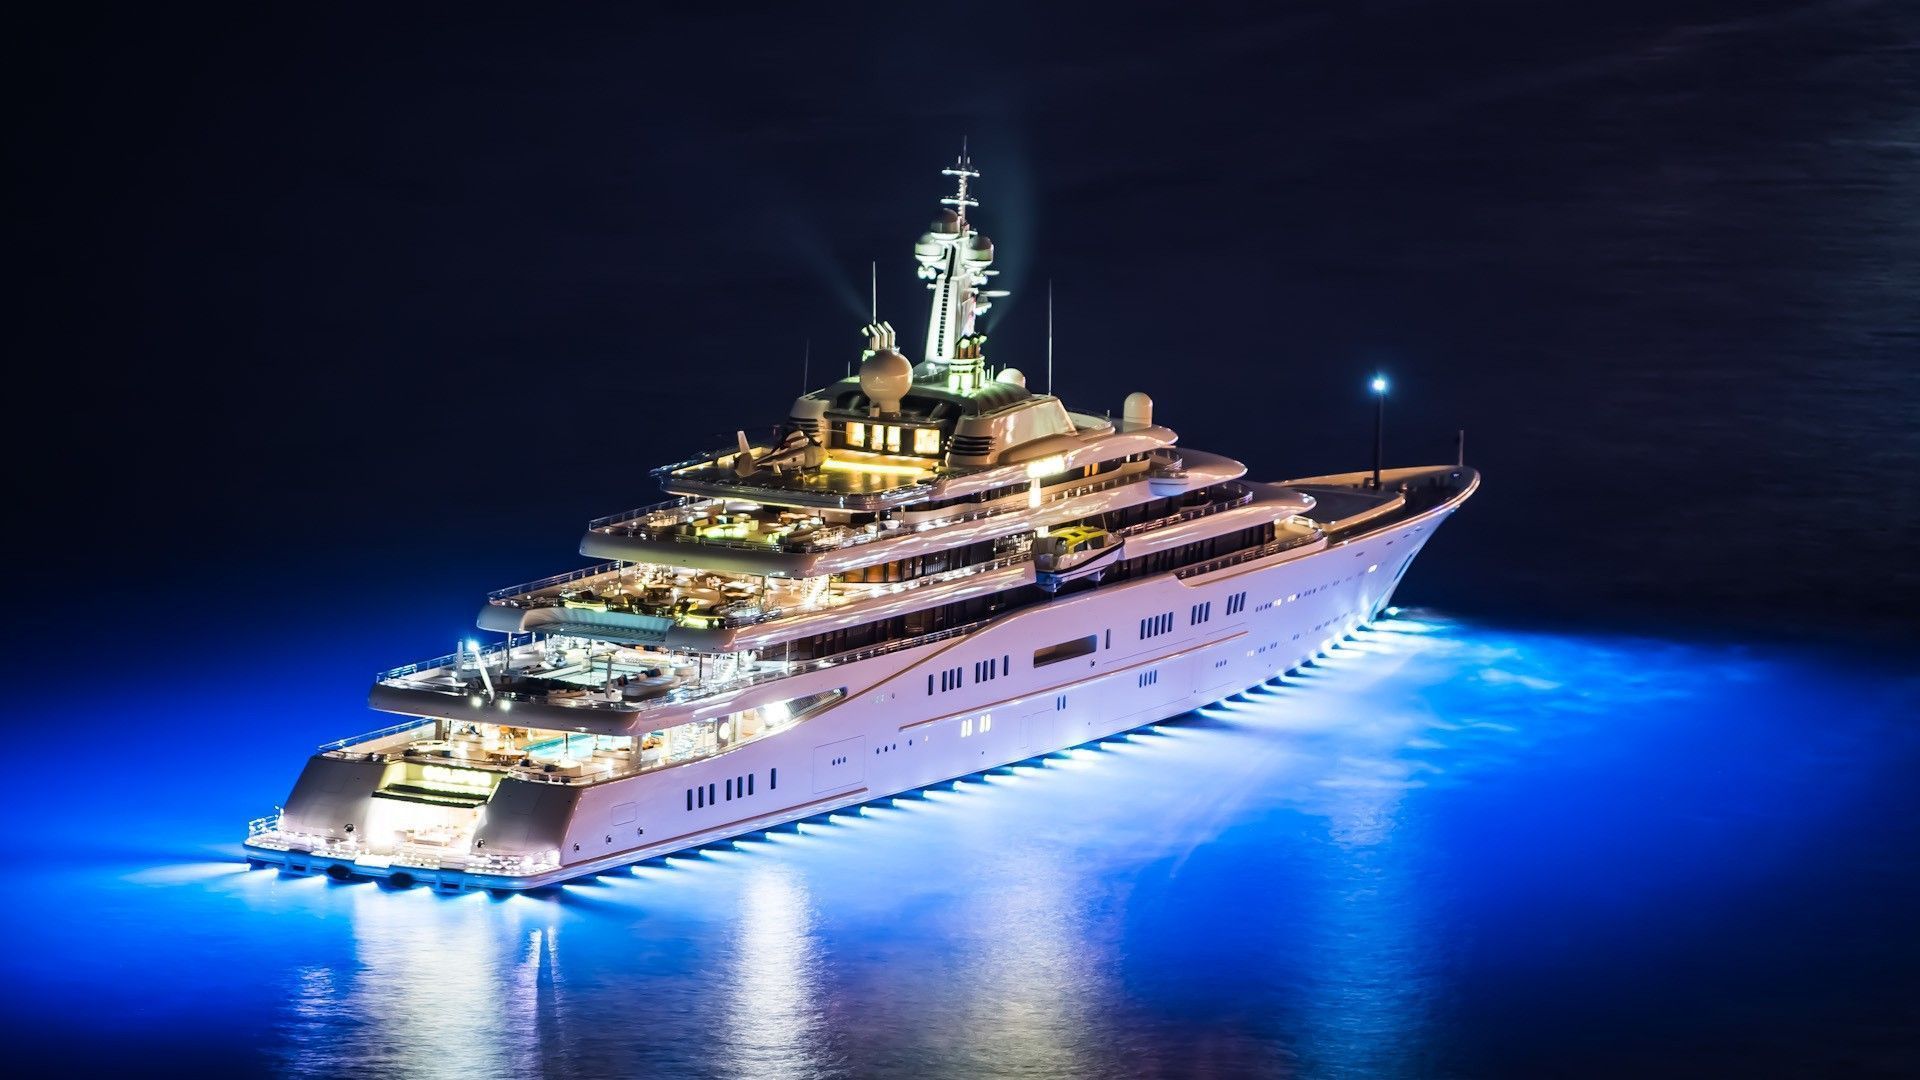 Night lights on expensive yacht wallpapers and images - wallpapers ...